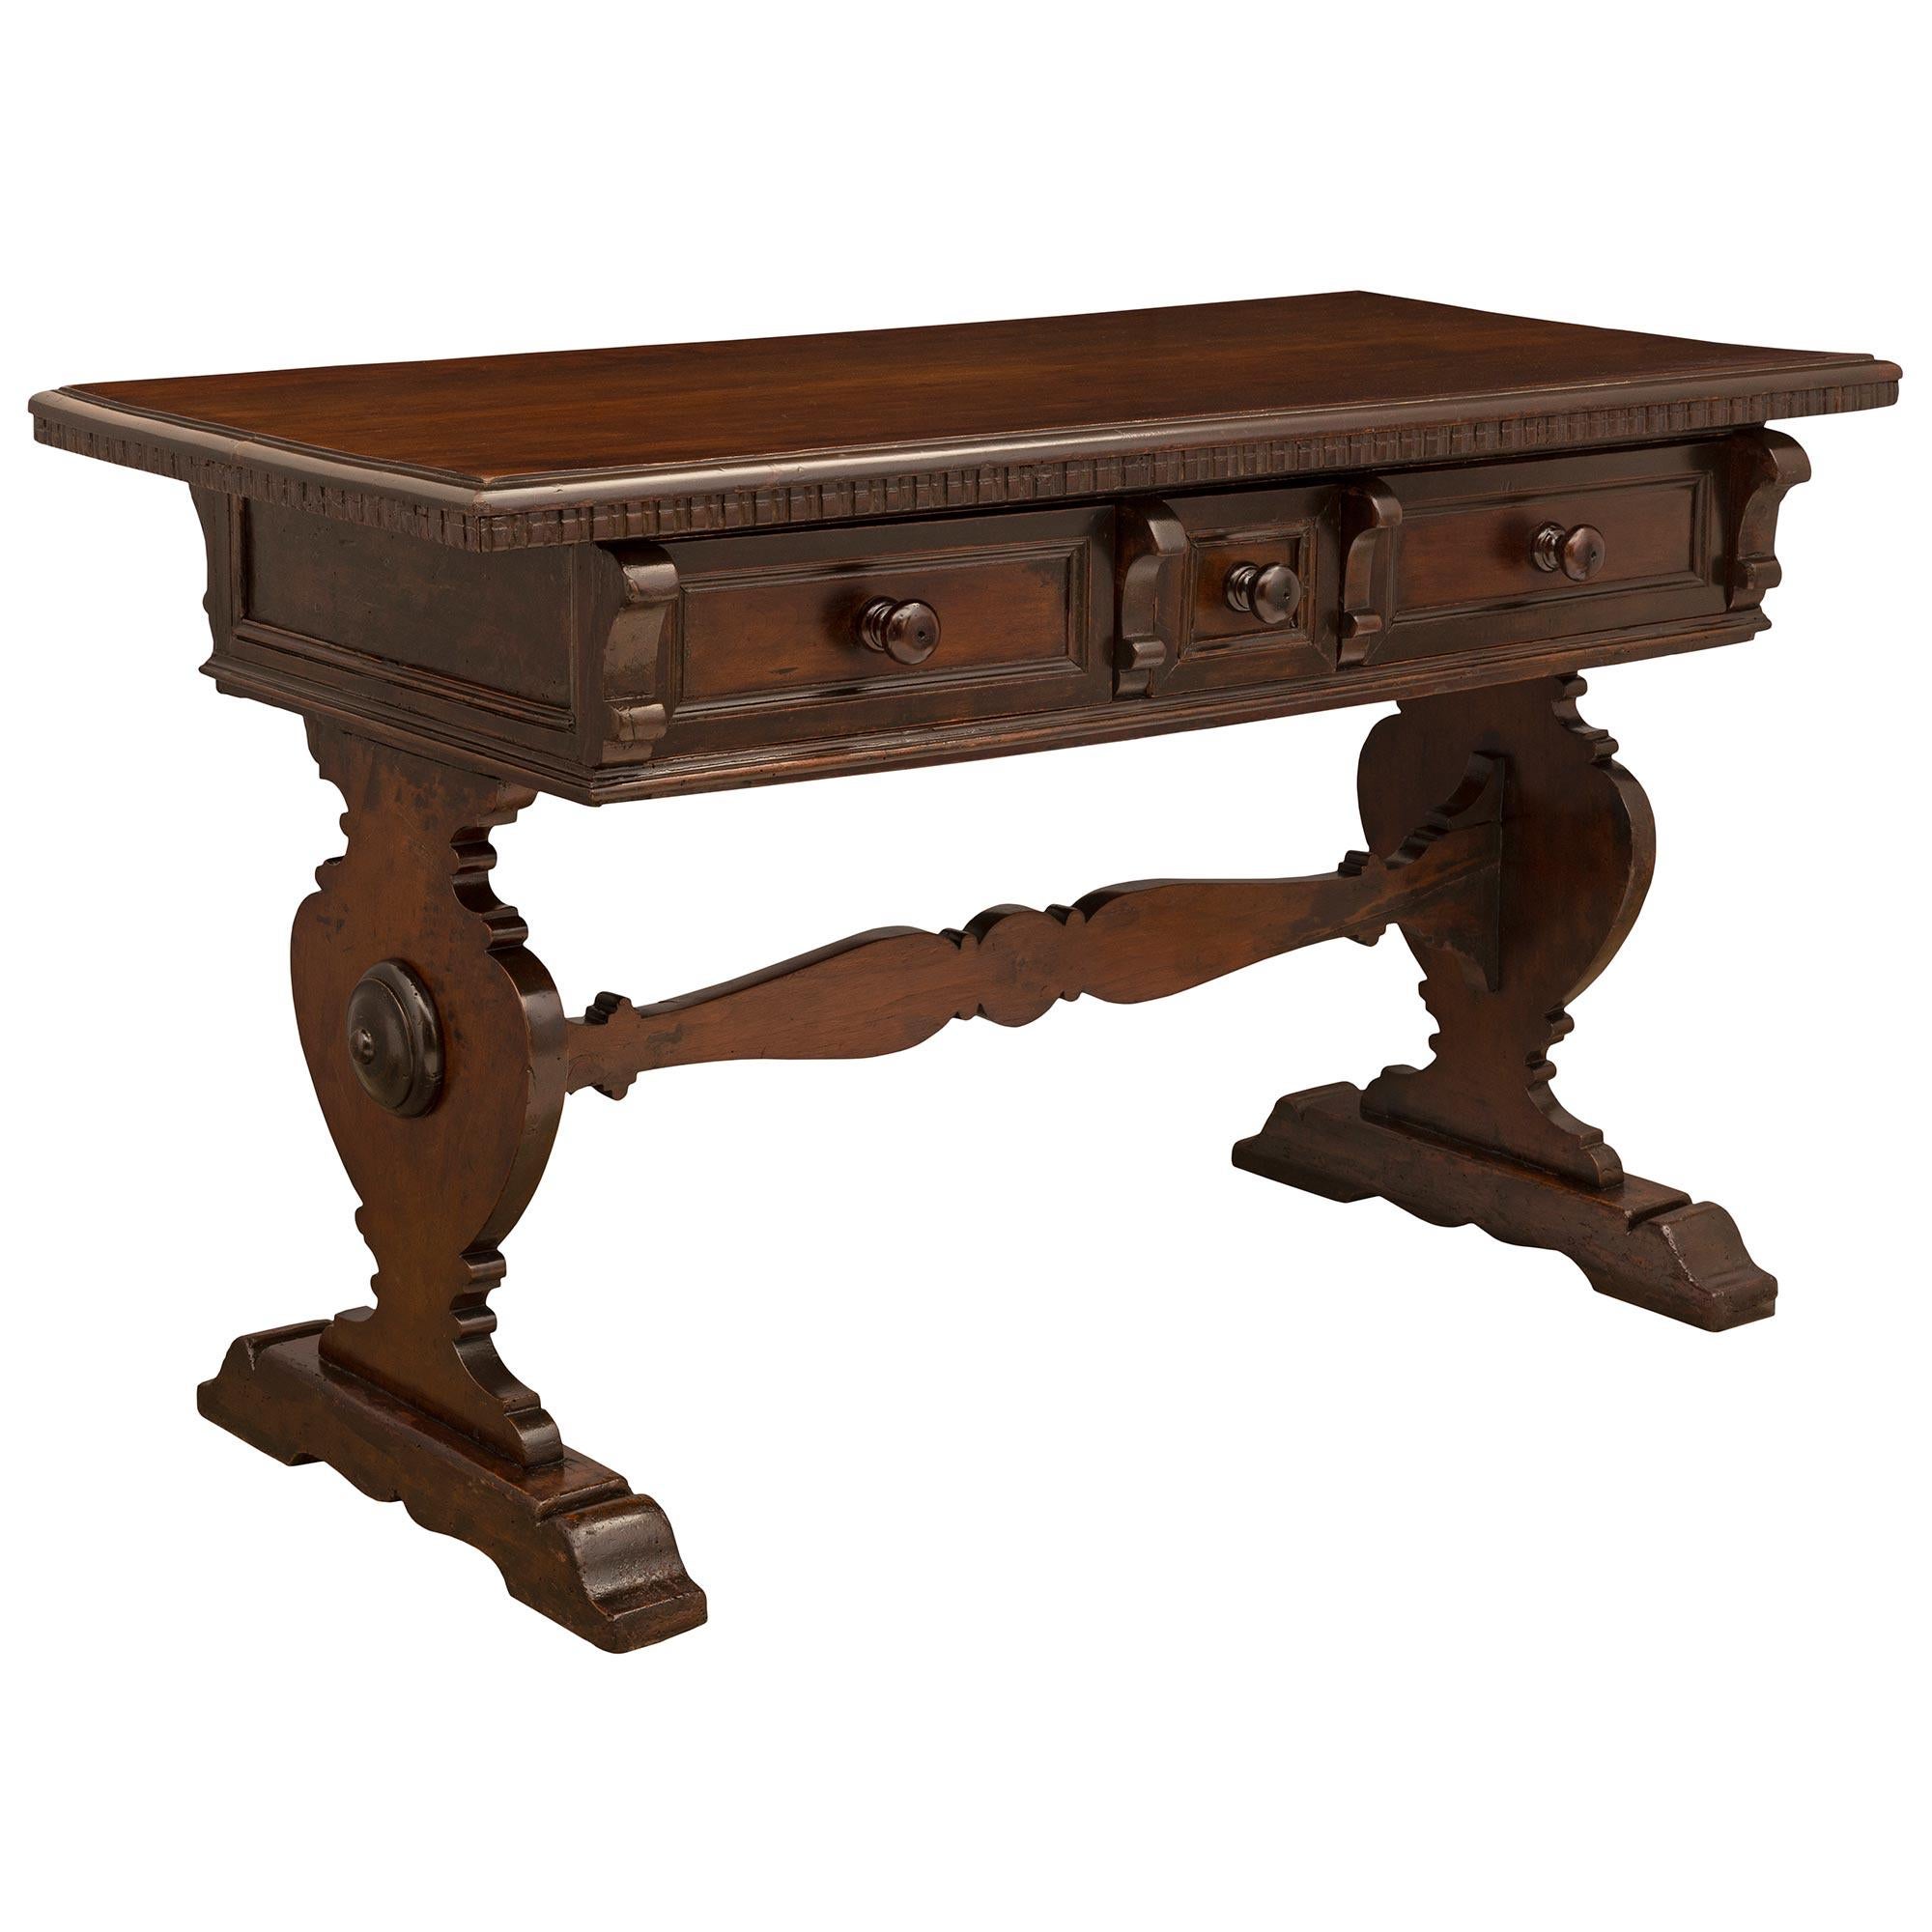 A very handsome Italian 19th century walnut trestle table. The table is raised on two carved supports joined by a carved stretcher. At the paneled frieze are three drawers with walnut pulls. All below the solid walnut top with dentil-style carved